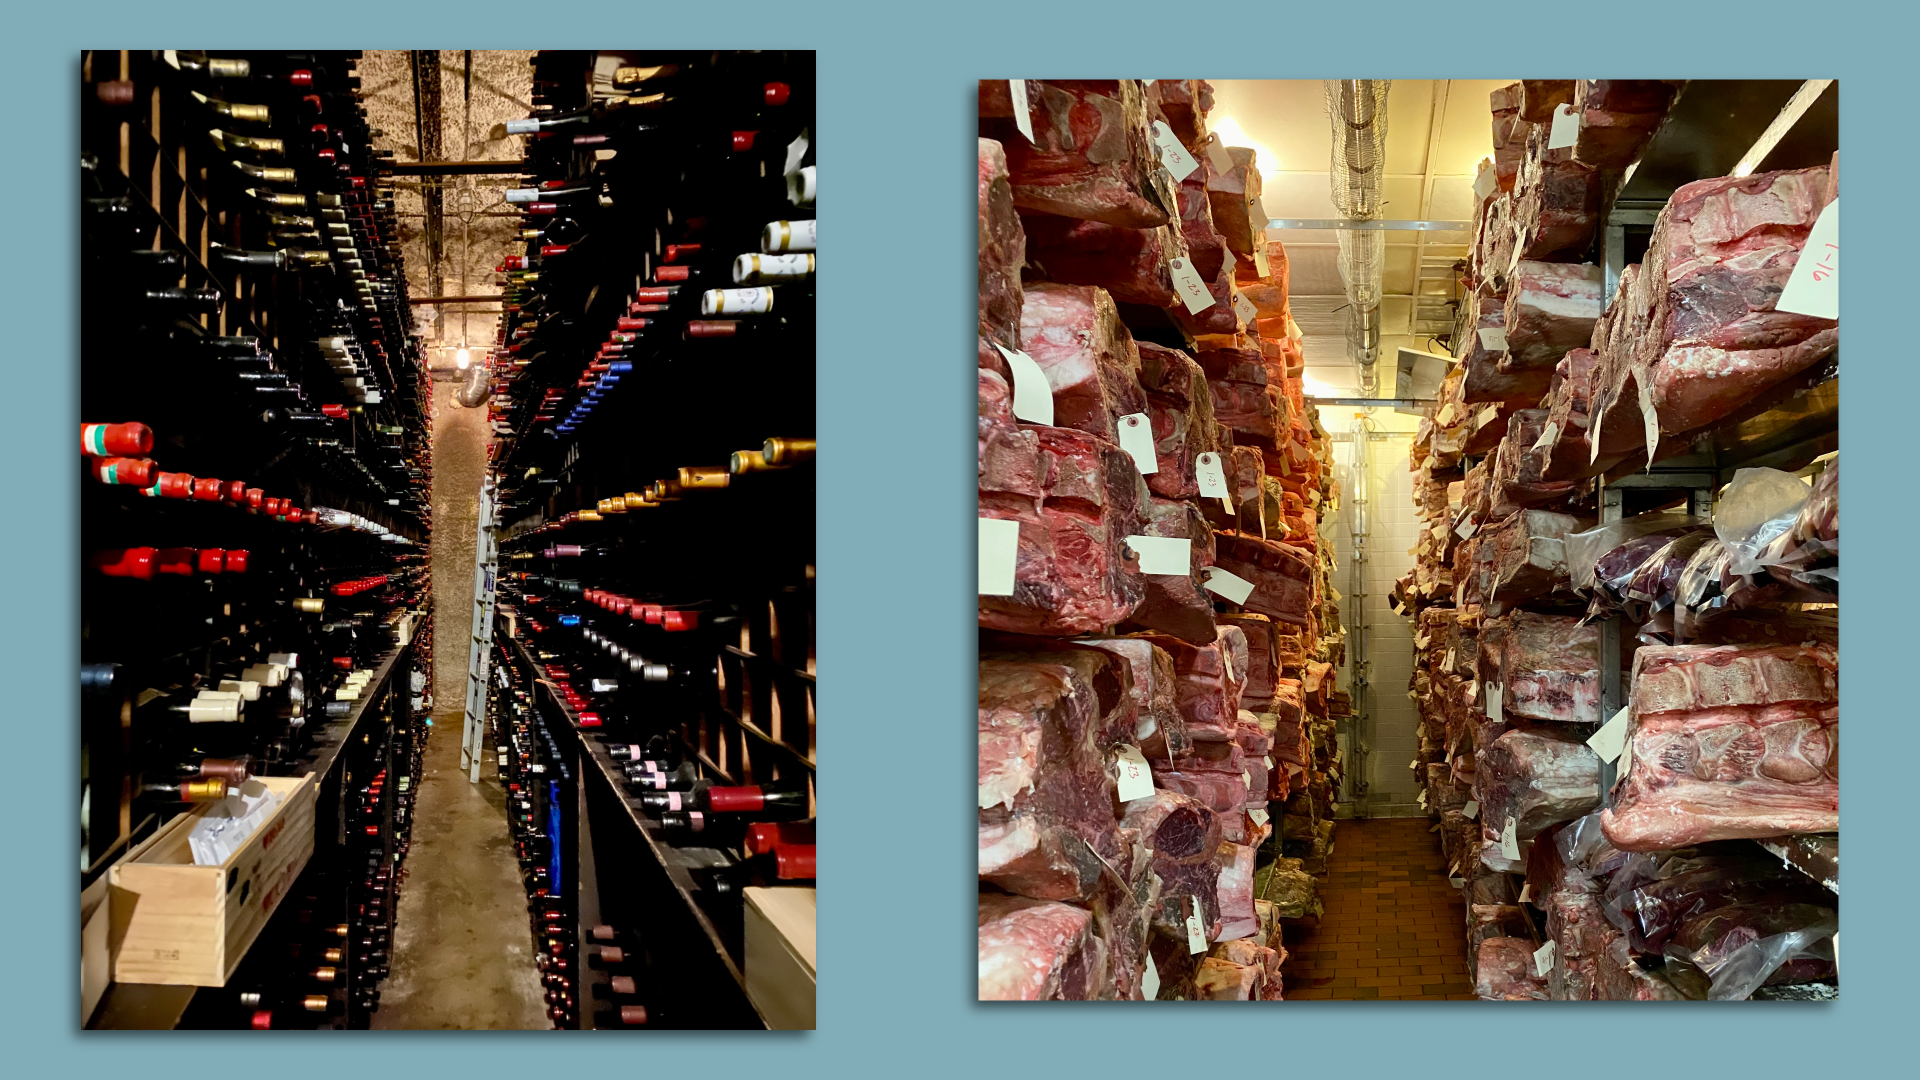 Side-by-side images of a crowded wine cellar and meat locker at Bern's Steakhouse.